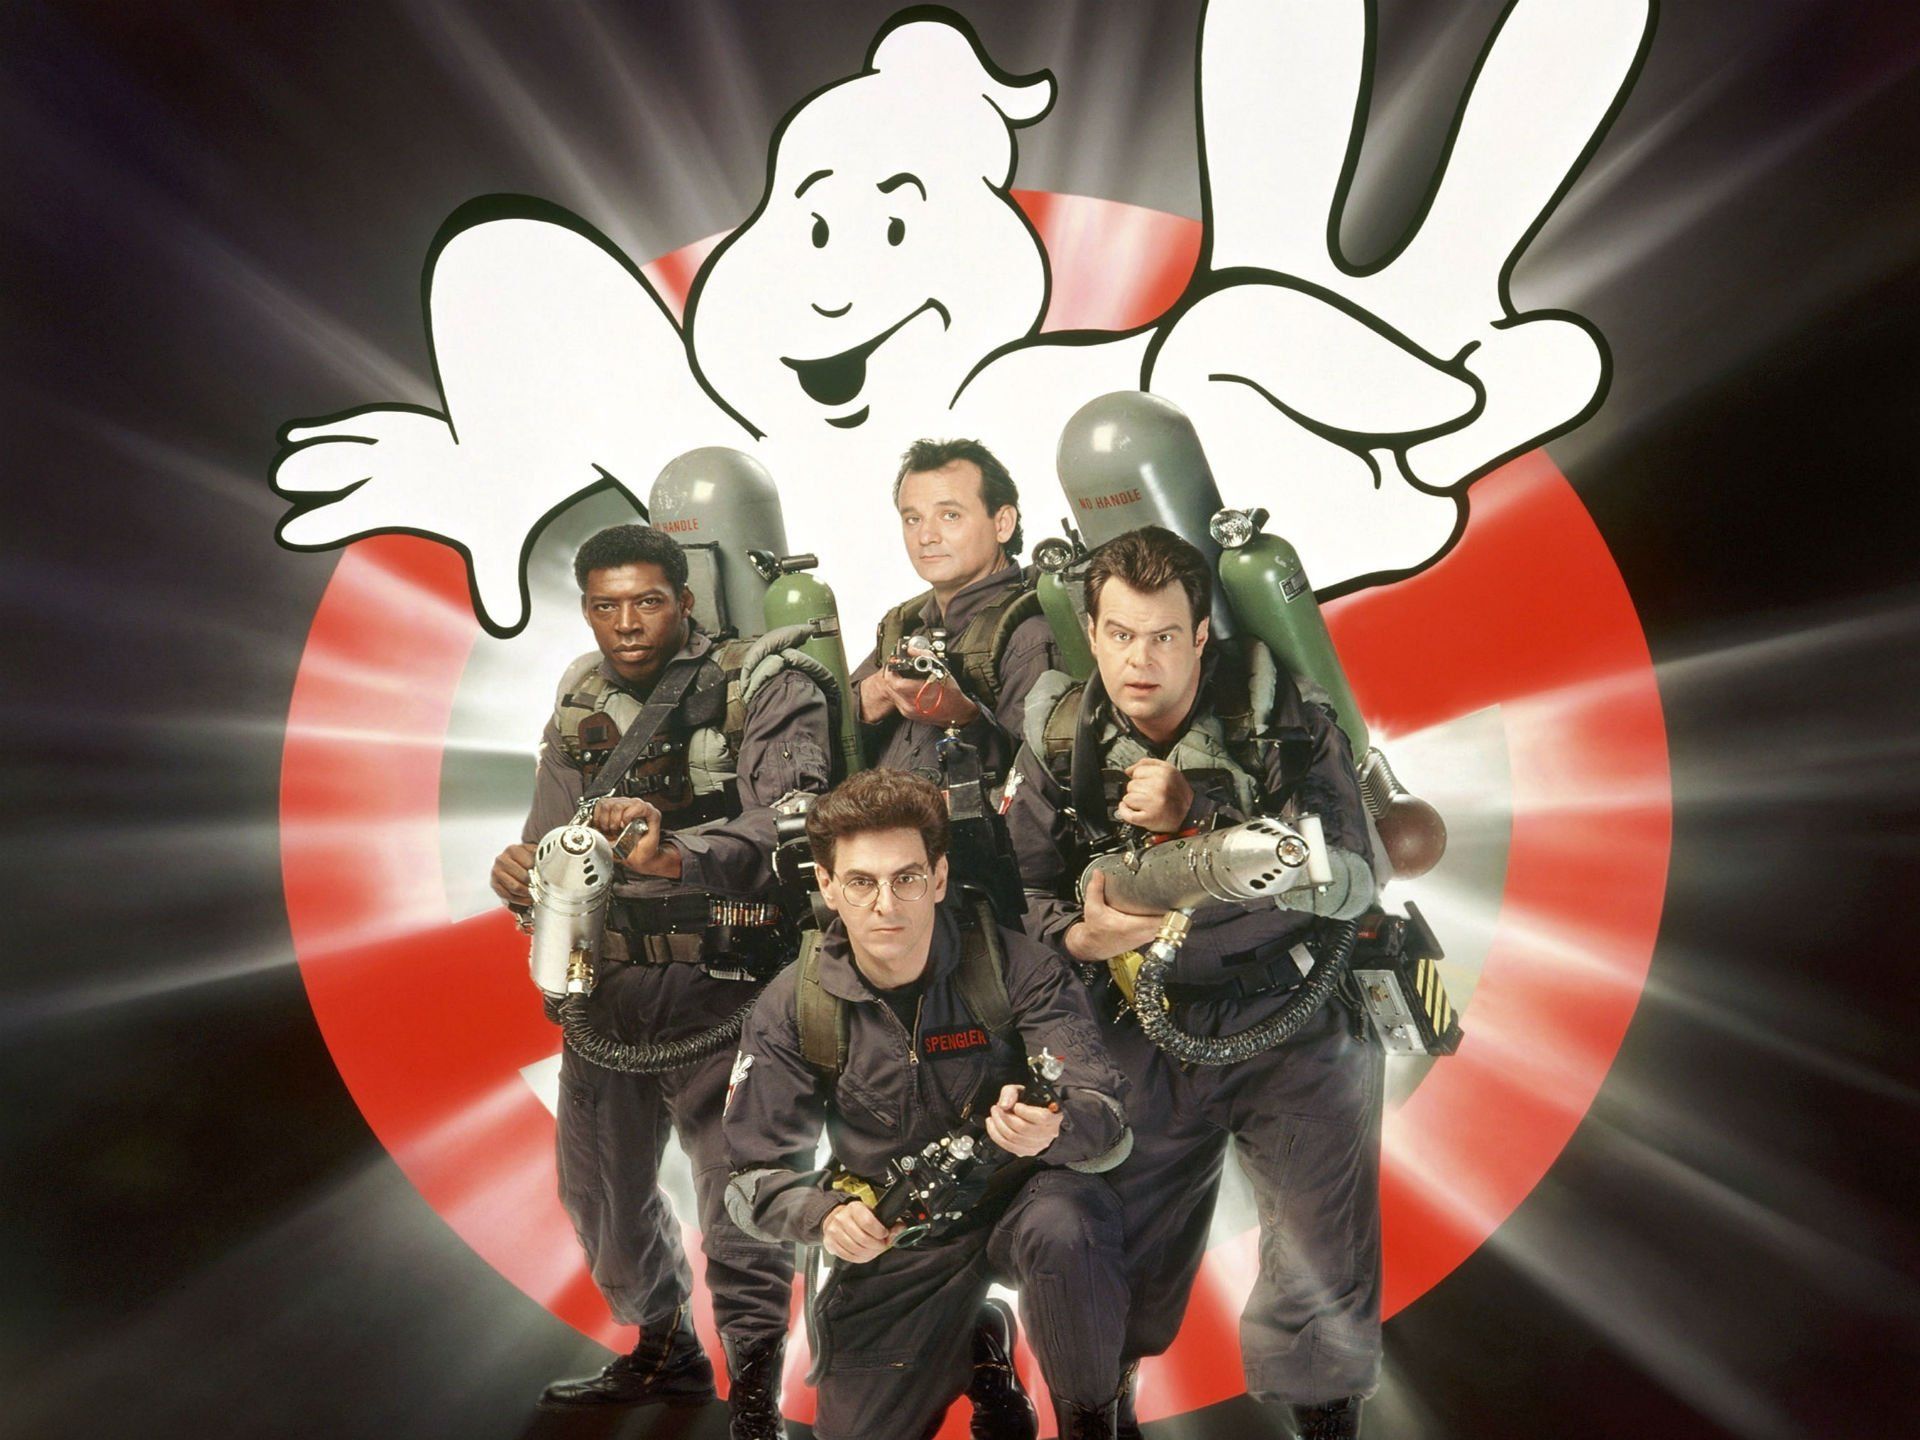 GHOSTBUSTERS action adventure supernatural comedy ghost wallpaper ...